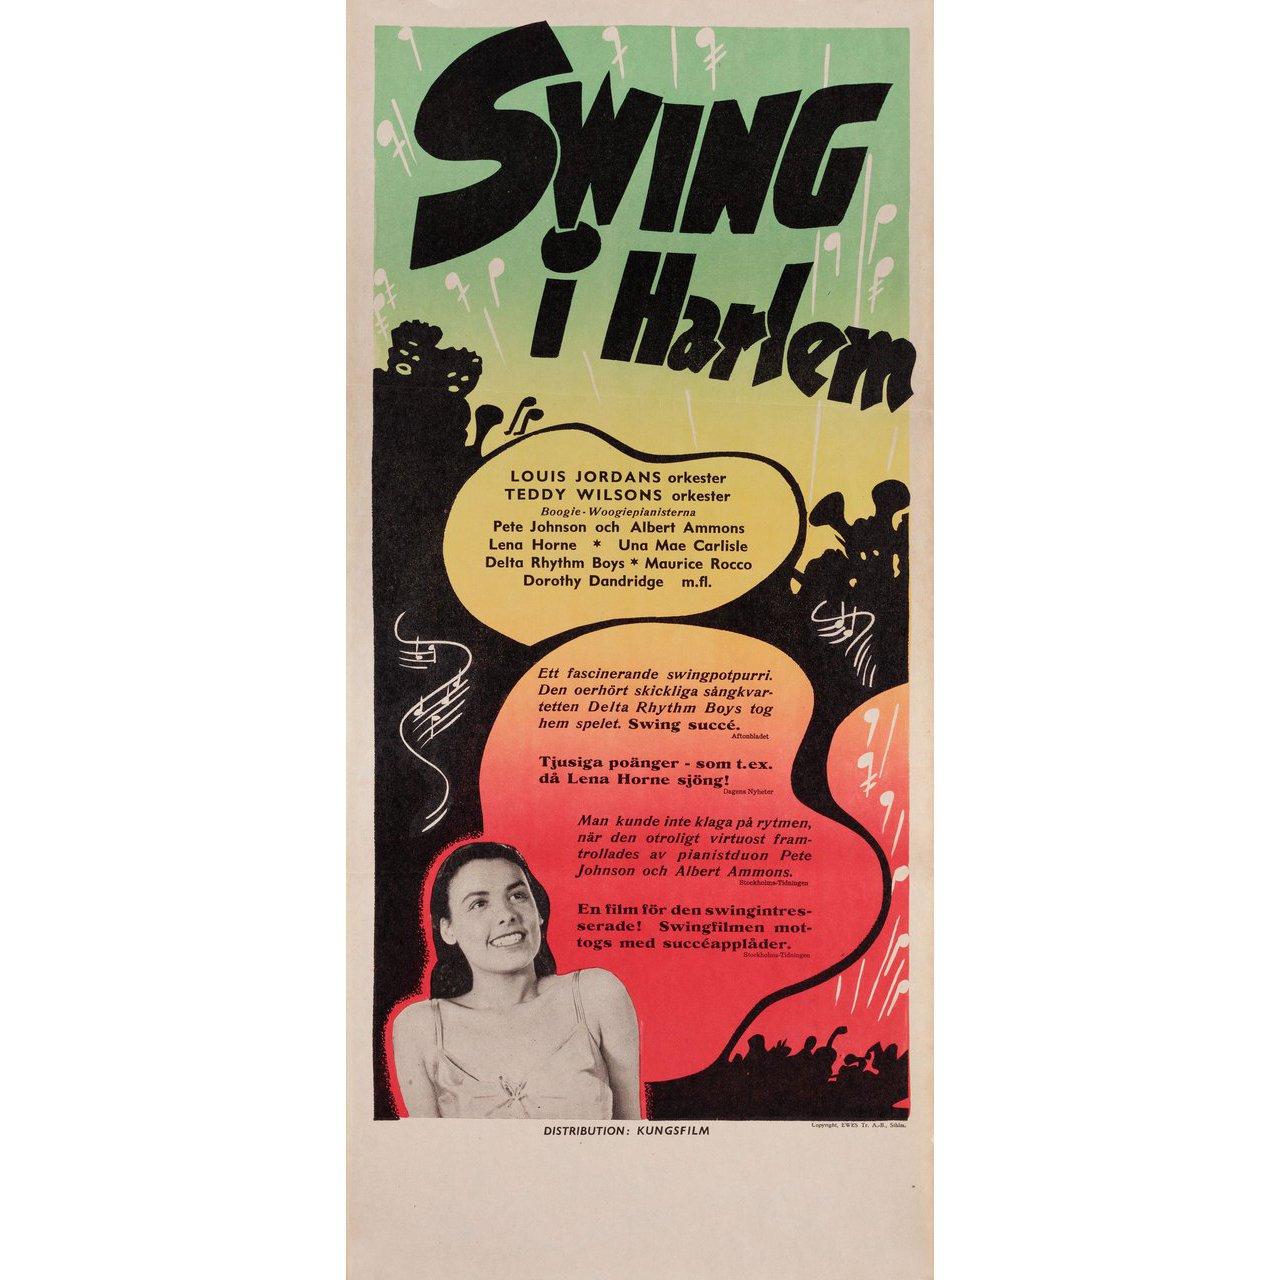 Original 1946 Swedish stolpe poster for the film Swingtime Jamboree (Swing in Harlem) directed by William Forest Crouch with Stepin Fetchit / Albert Ammons / Delta Rhythm Boys. Very Good-Fine condition, folded. Many original posters were issued